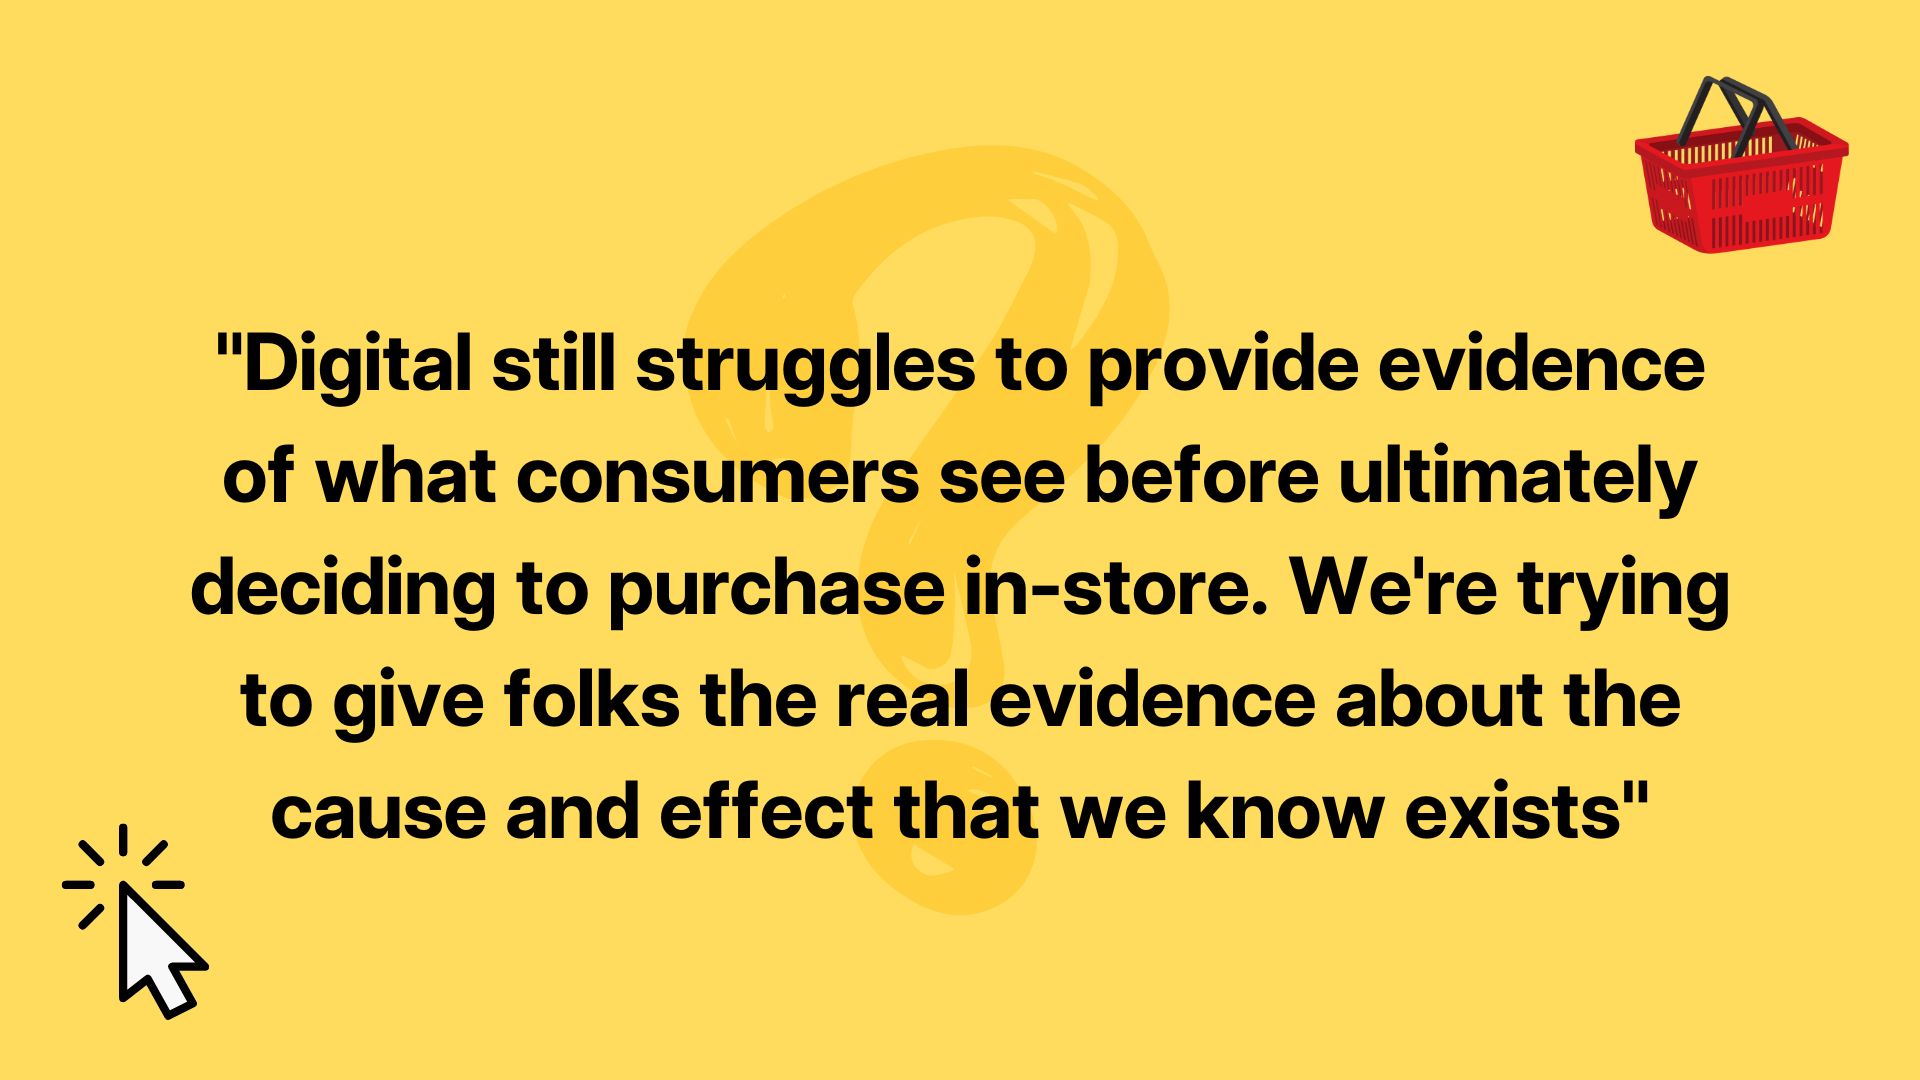 Digital still struggles to provide evidence of what consumers see before ultimately deciding to purchase in-store. We're trying to give folks the real evidence about the cause and effect that we know exists